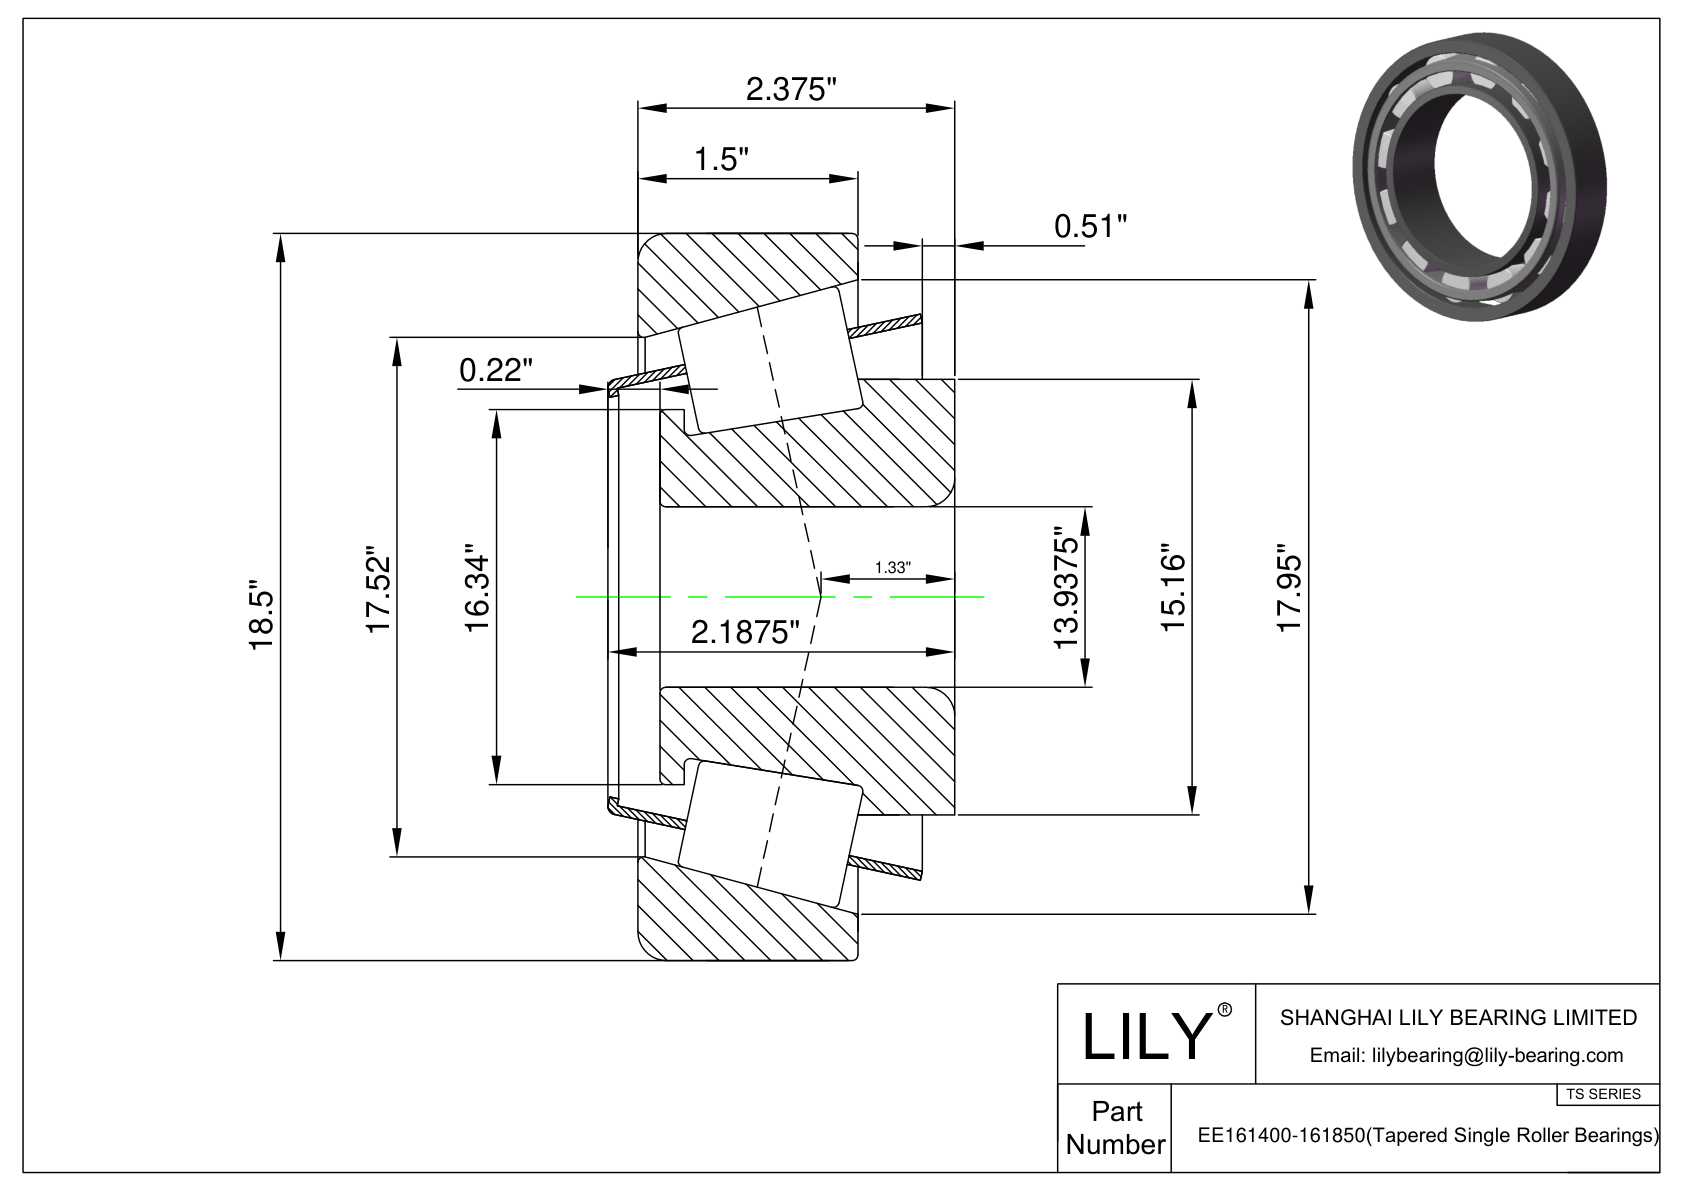 EE161400-161850 TS (Tapered Single Roller Bearings) (Imperial) cad drawing